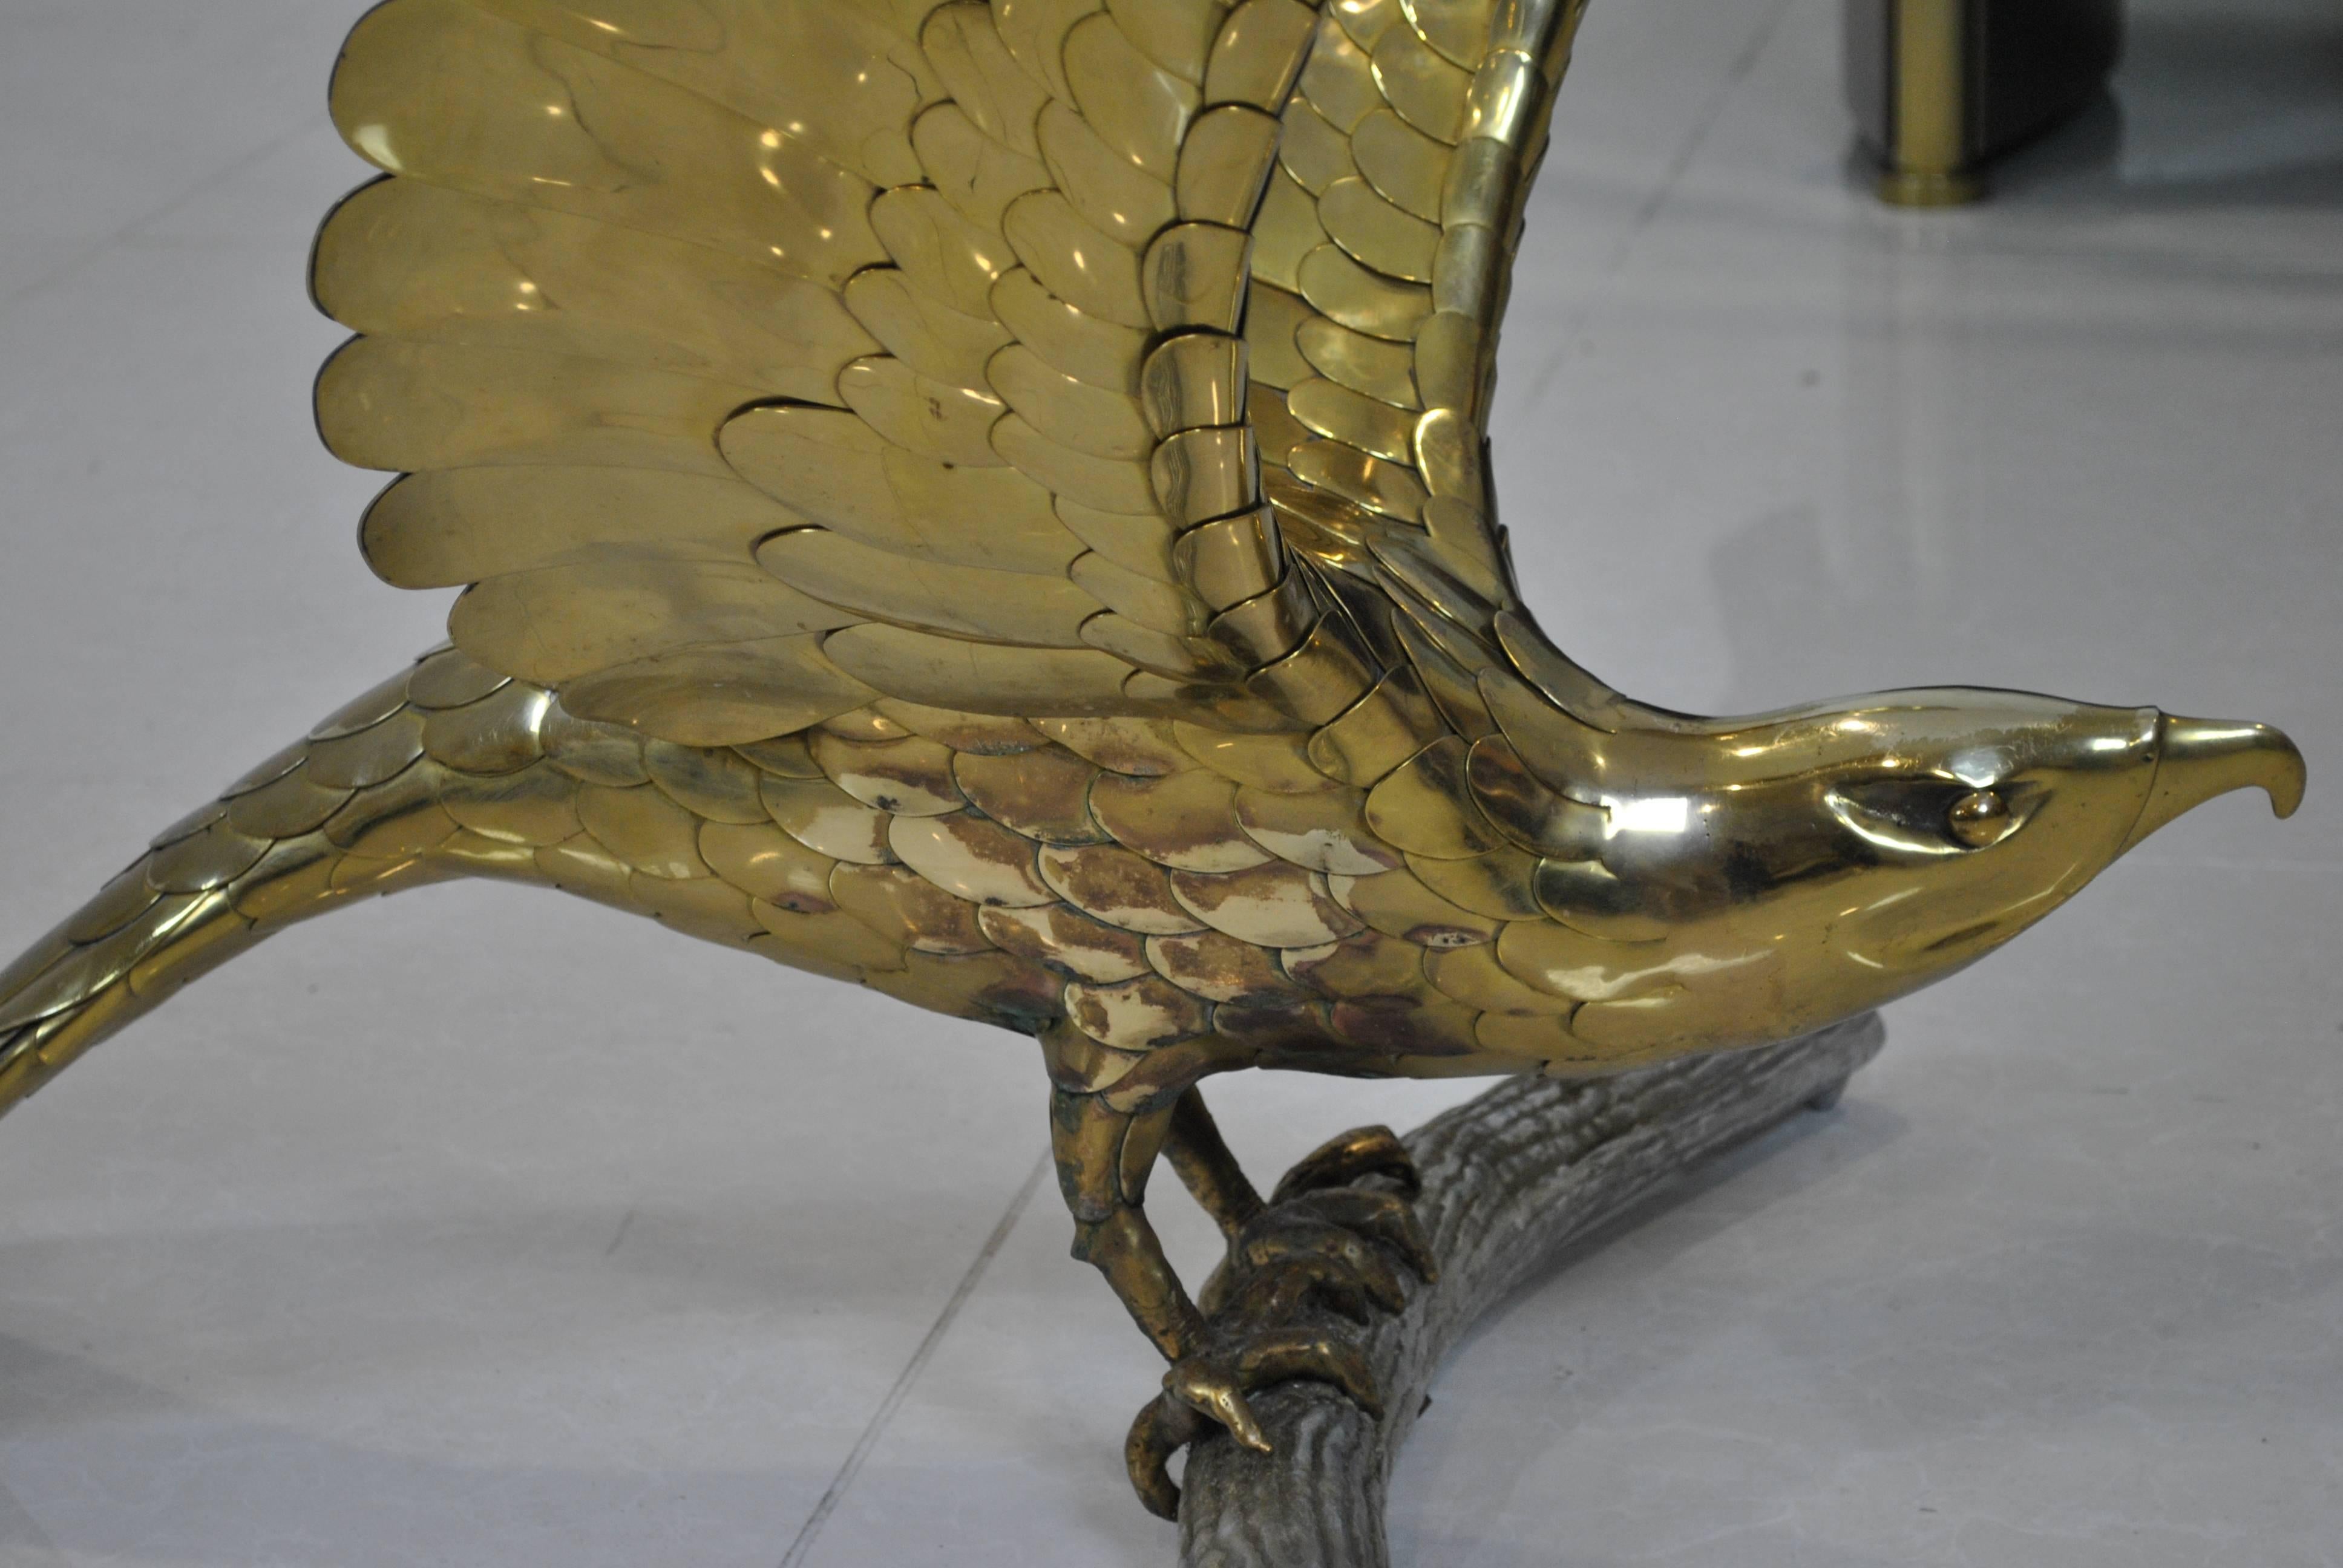 A rare and very large dining table with handmade brass eagles by Alain Chervet, with large thick glass top. The table date from the late 1970s and could work as a spectacular executive desk or center table also. This work is a lot more detailed than